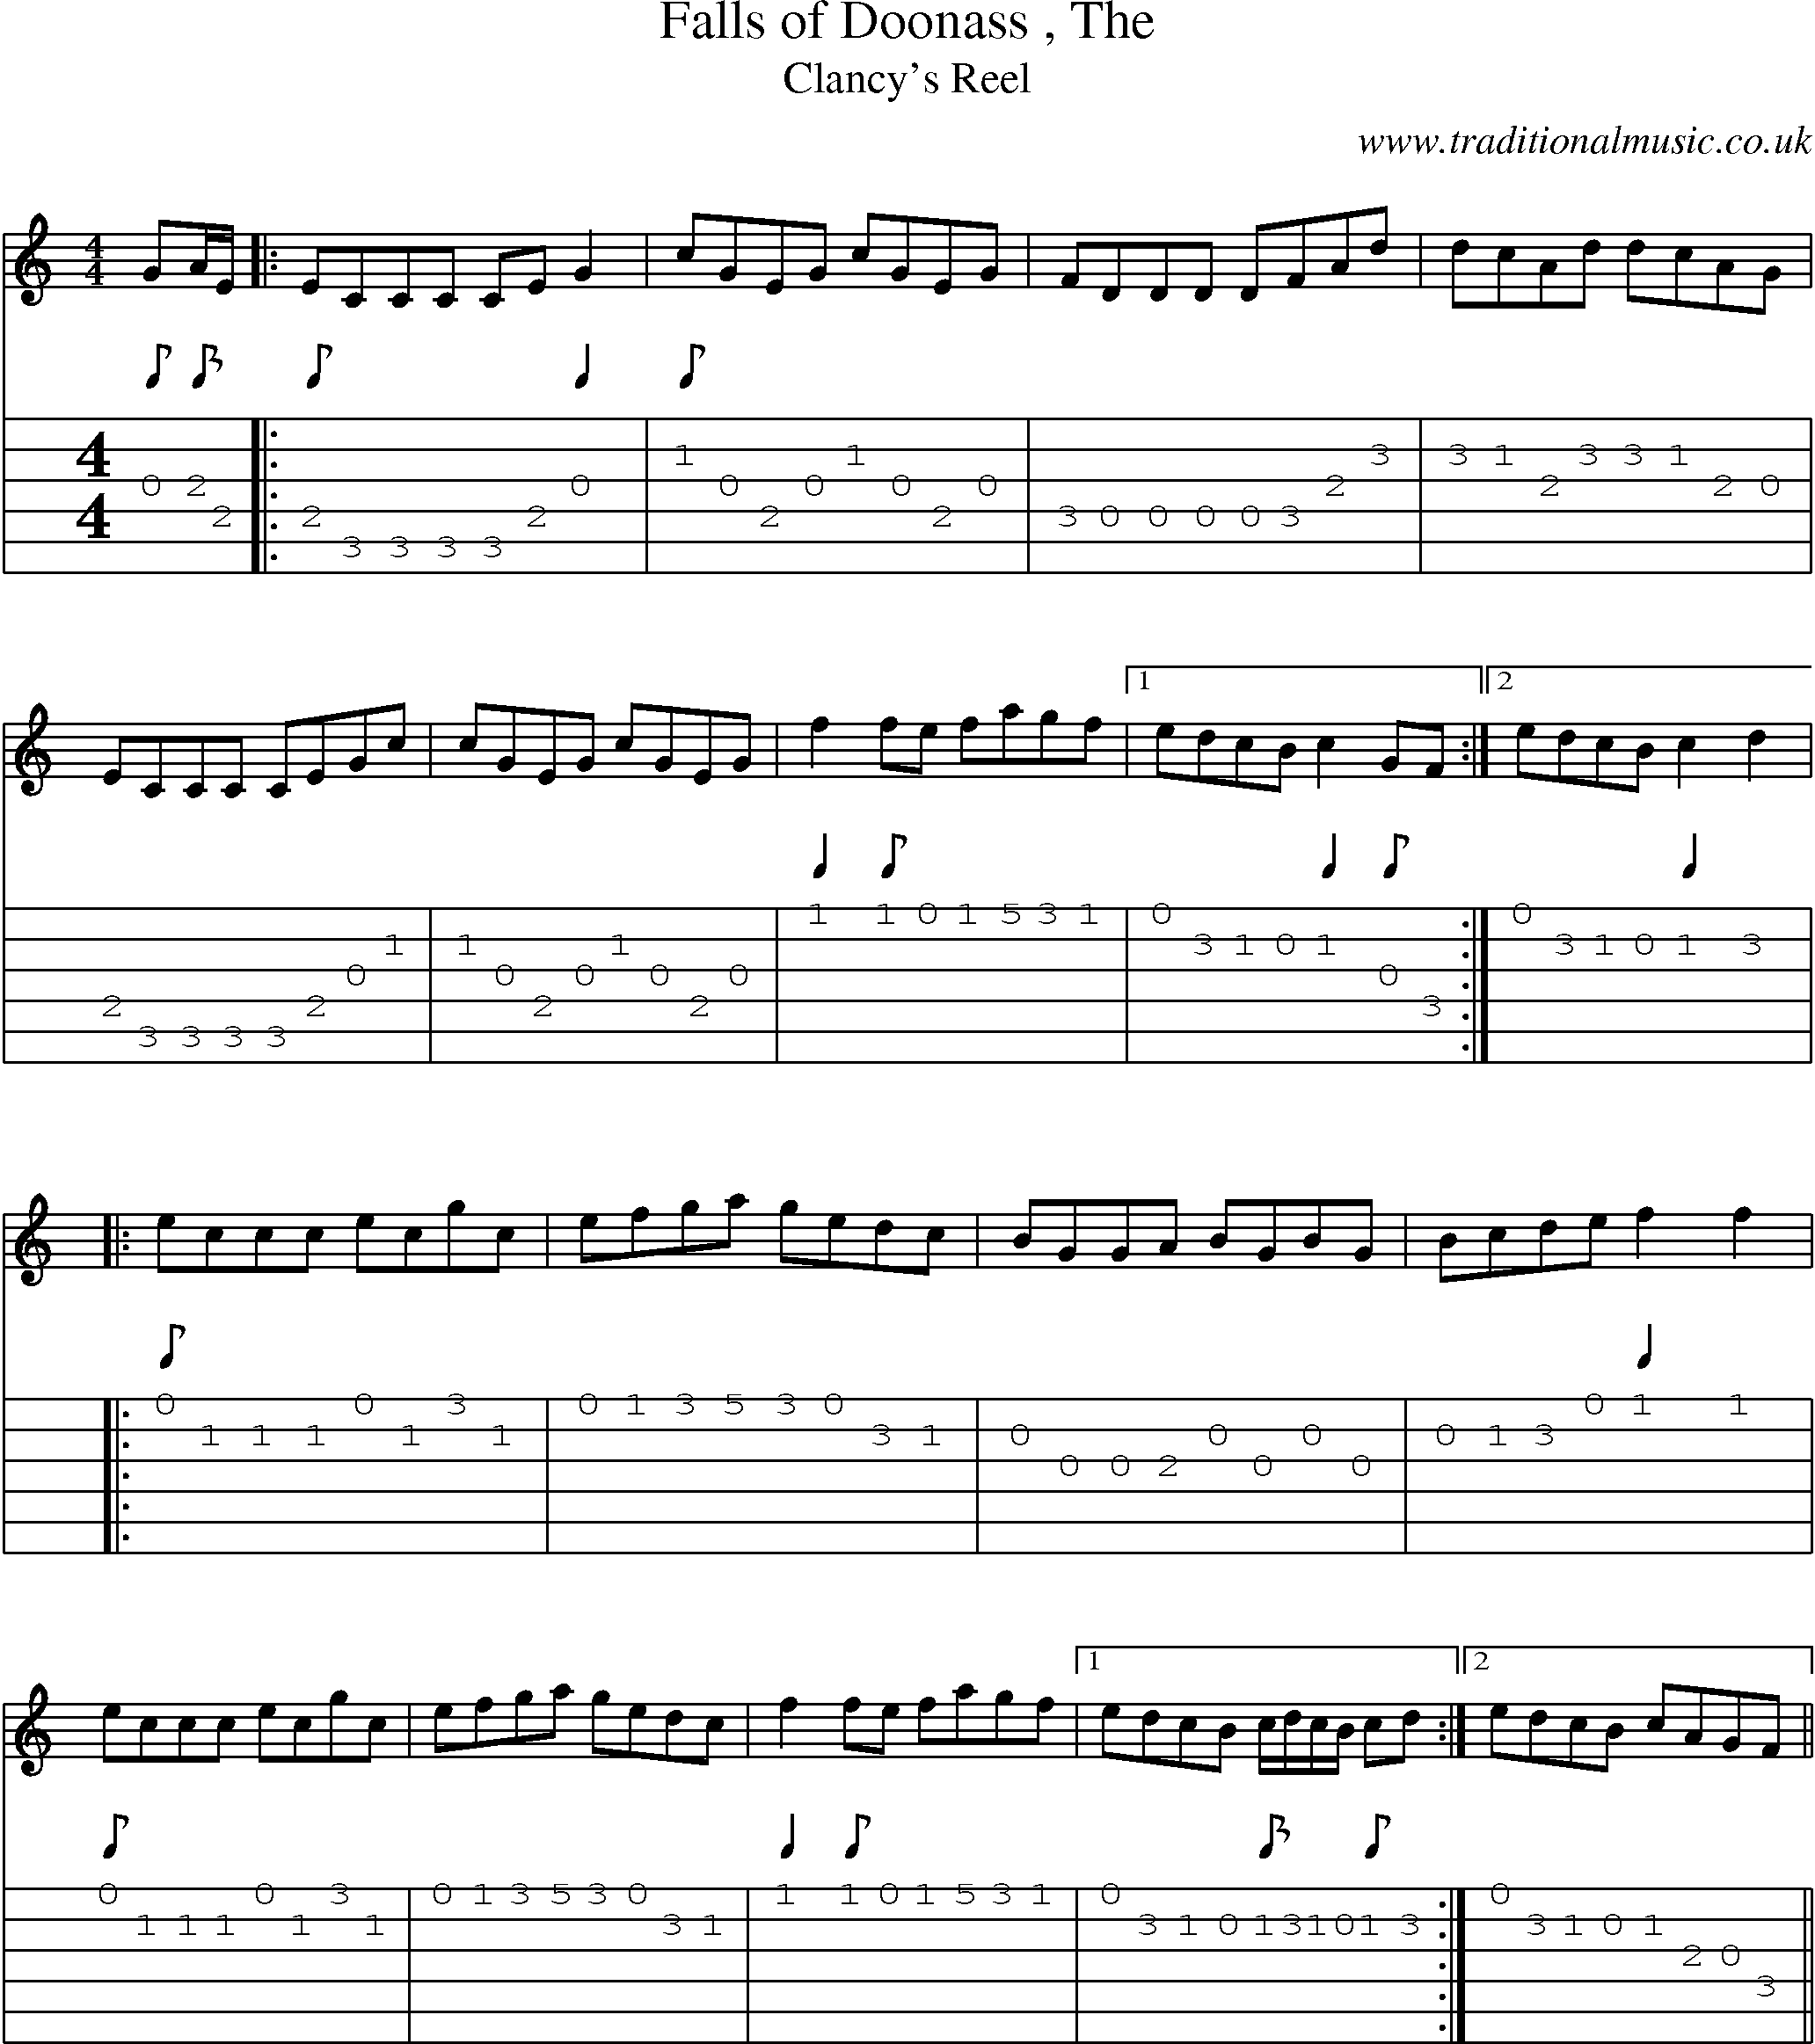 Music Score and Guitar Tabs for Falls Of Doonass